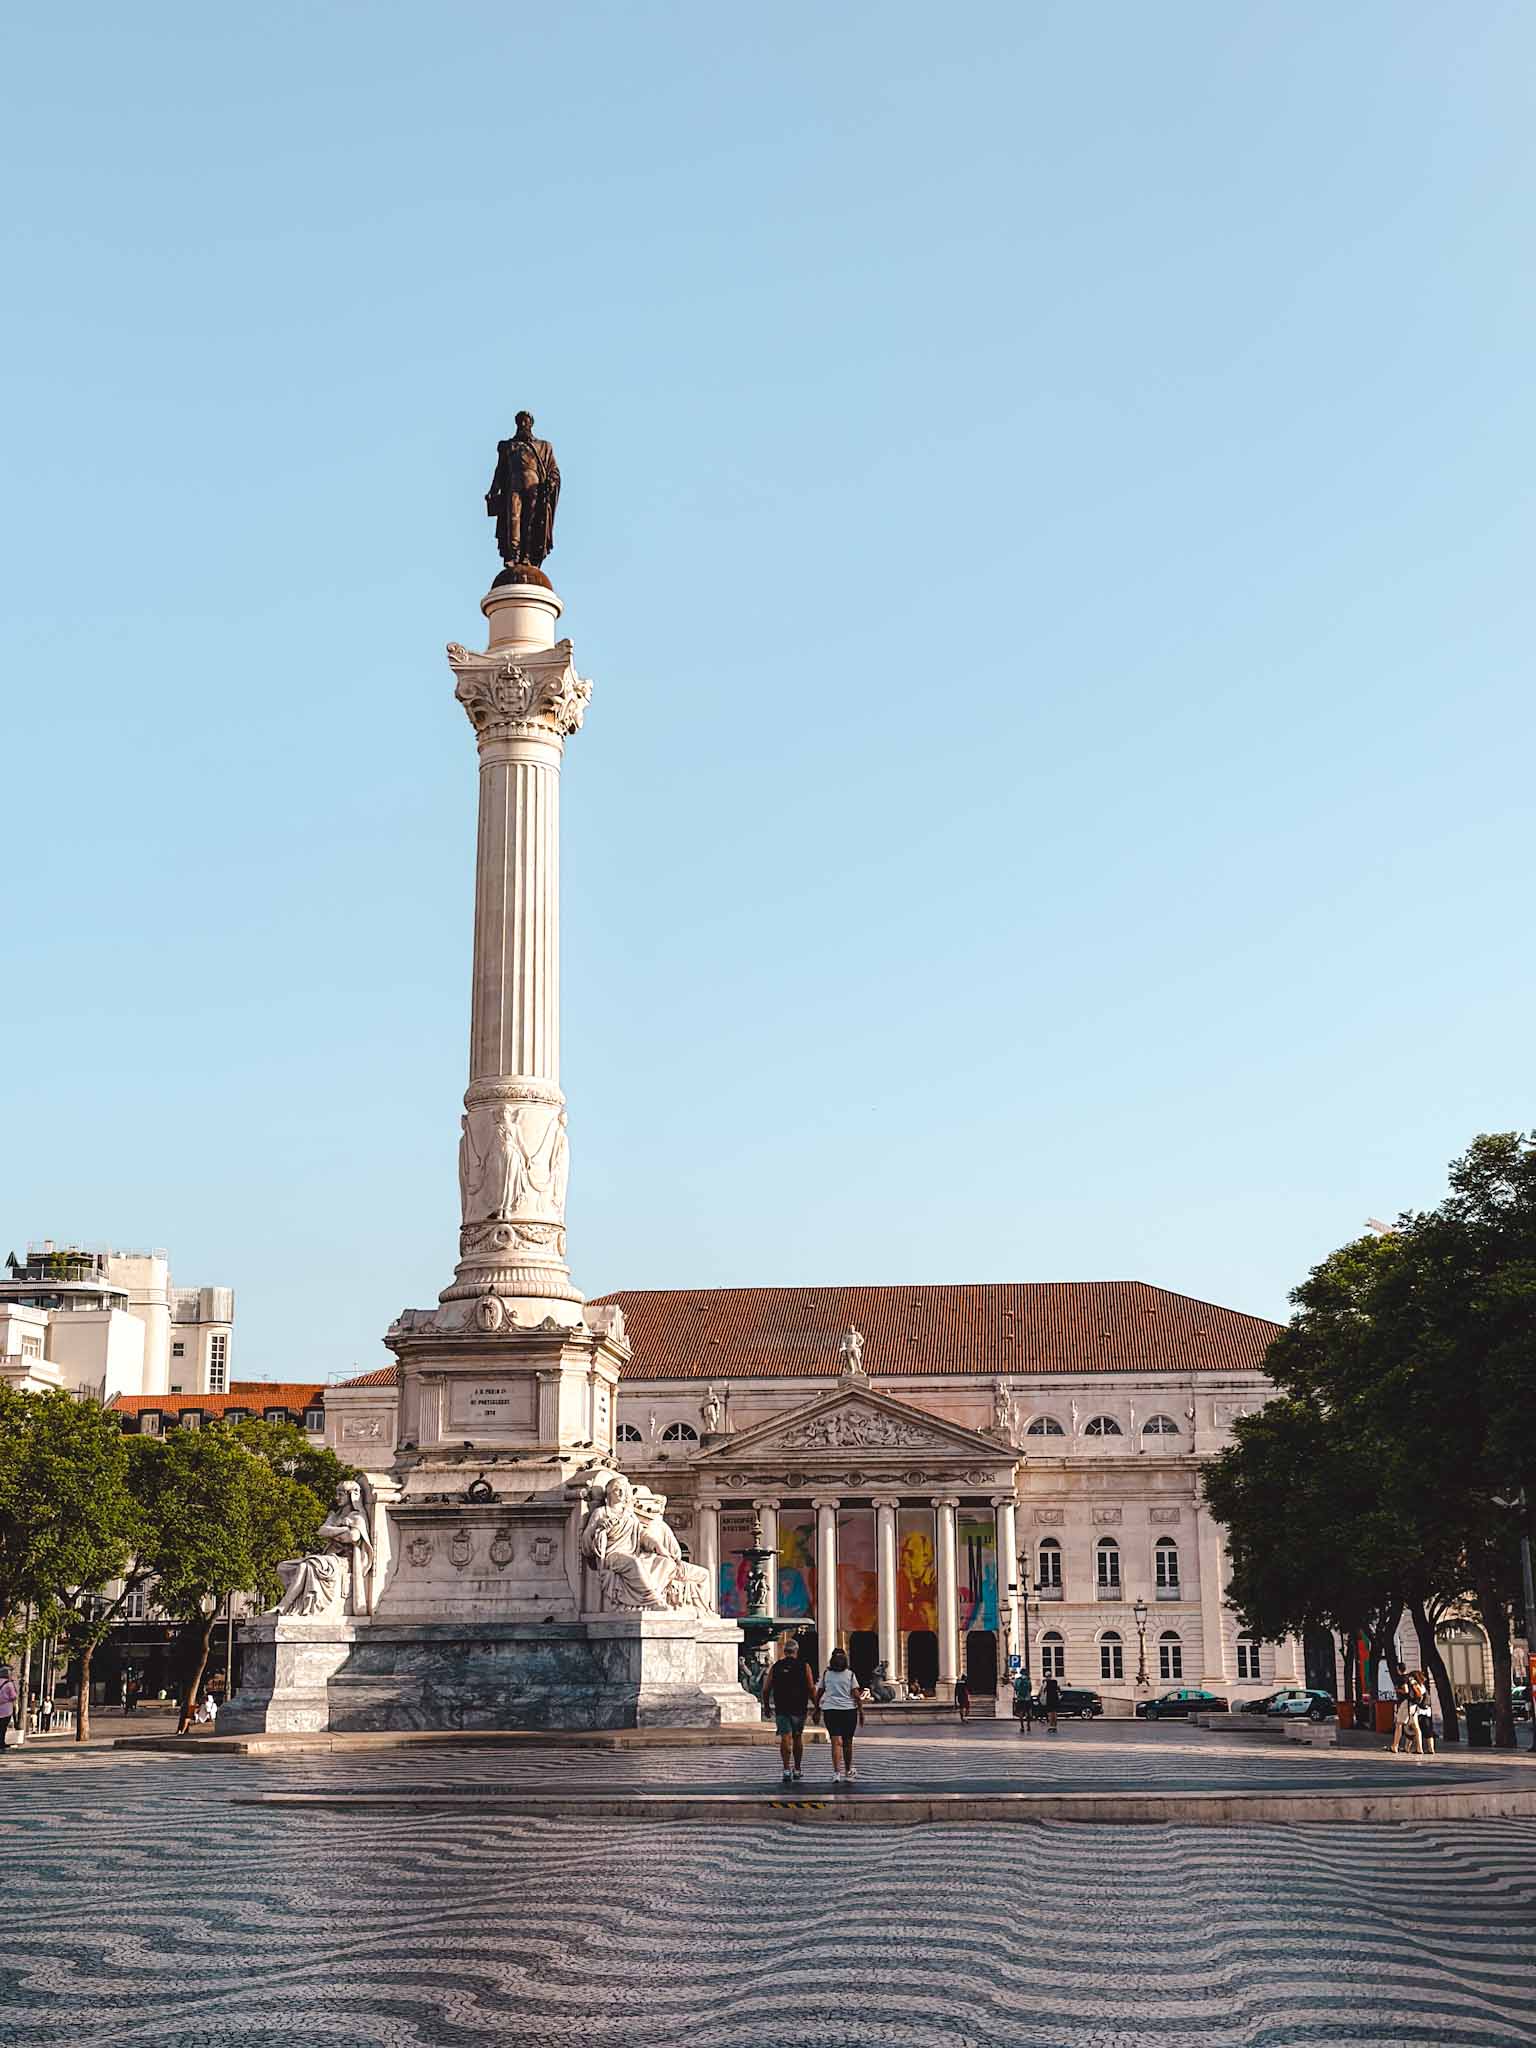 Best Instagram photo spots in Lisbon, Portugal - Arco do Bandeira and the Praça do Rossio